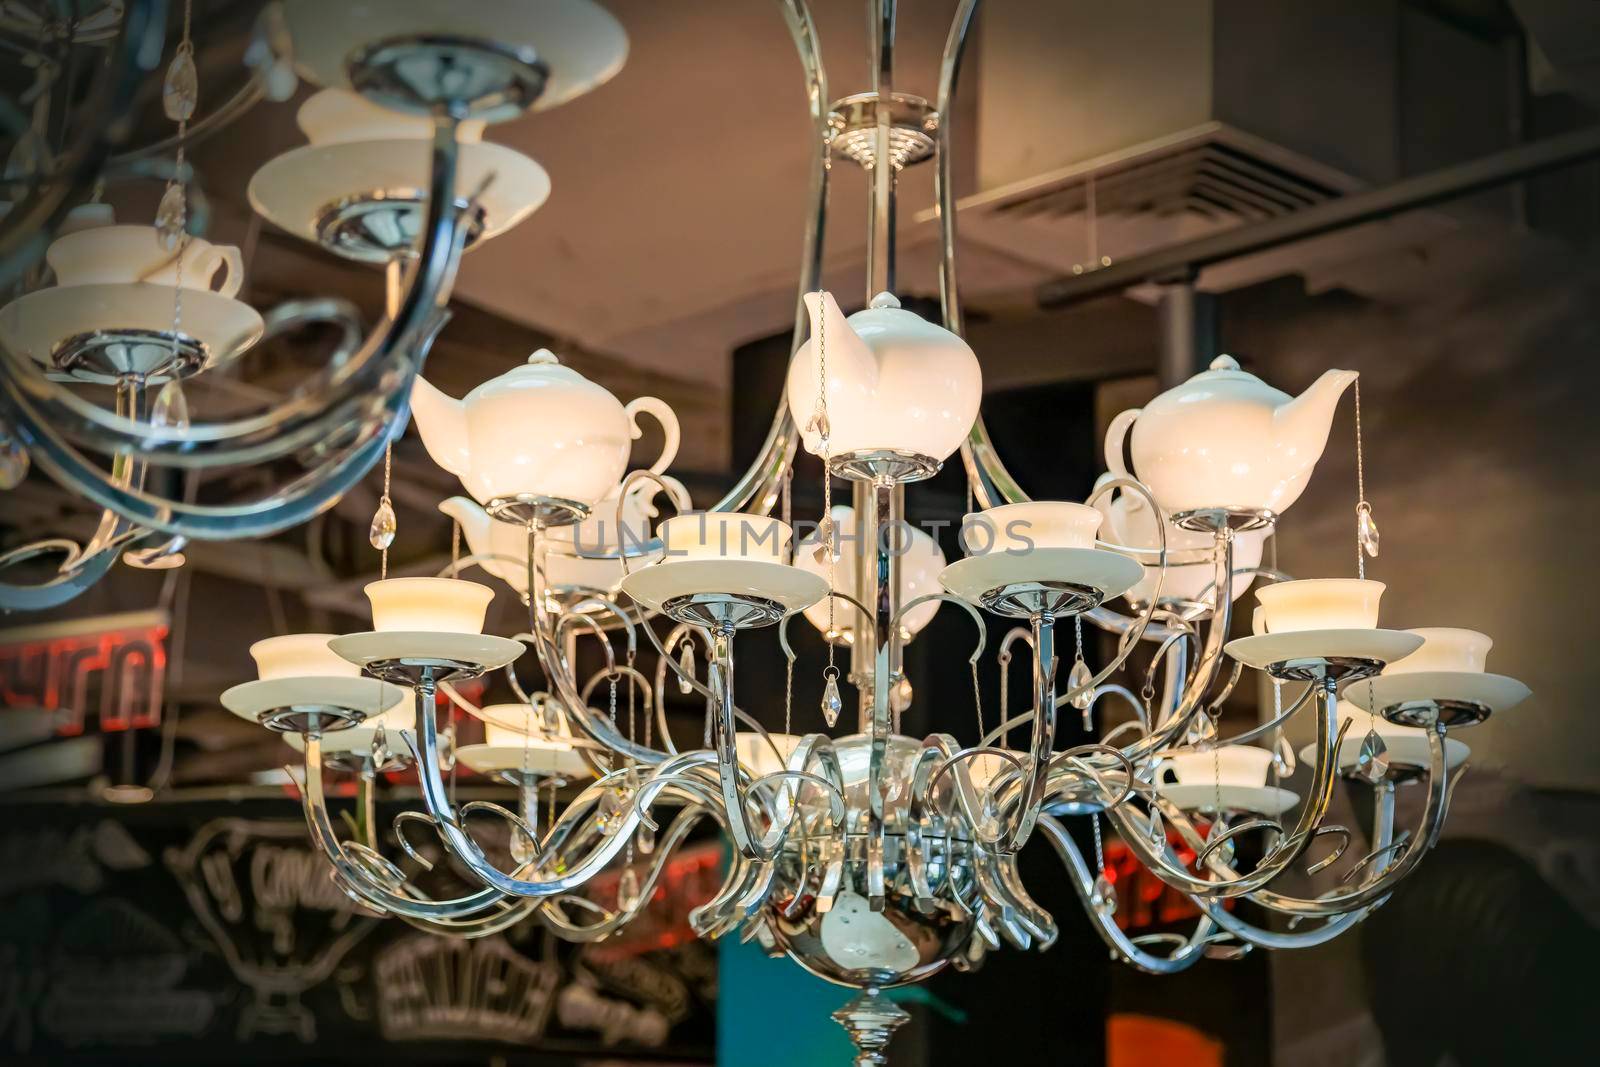 Luxurious large chandelier, lamps in the form of porcelain teapots and cups and saucers. by Yurich32